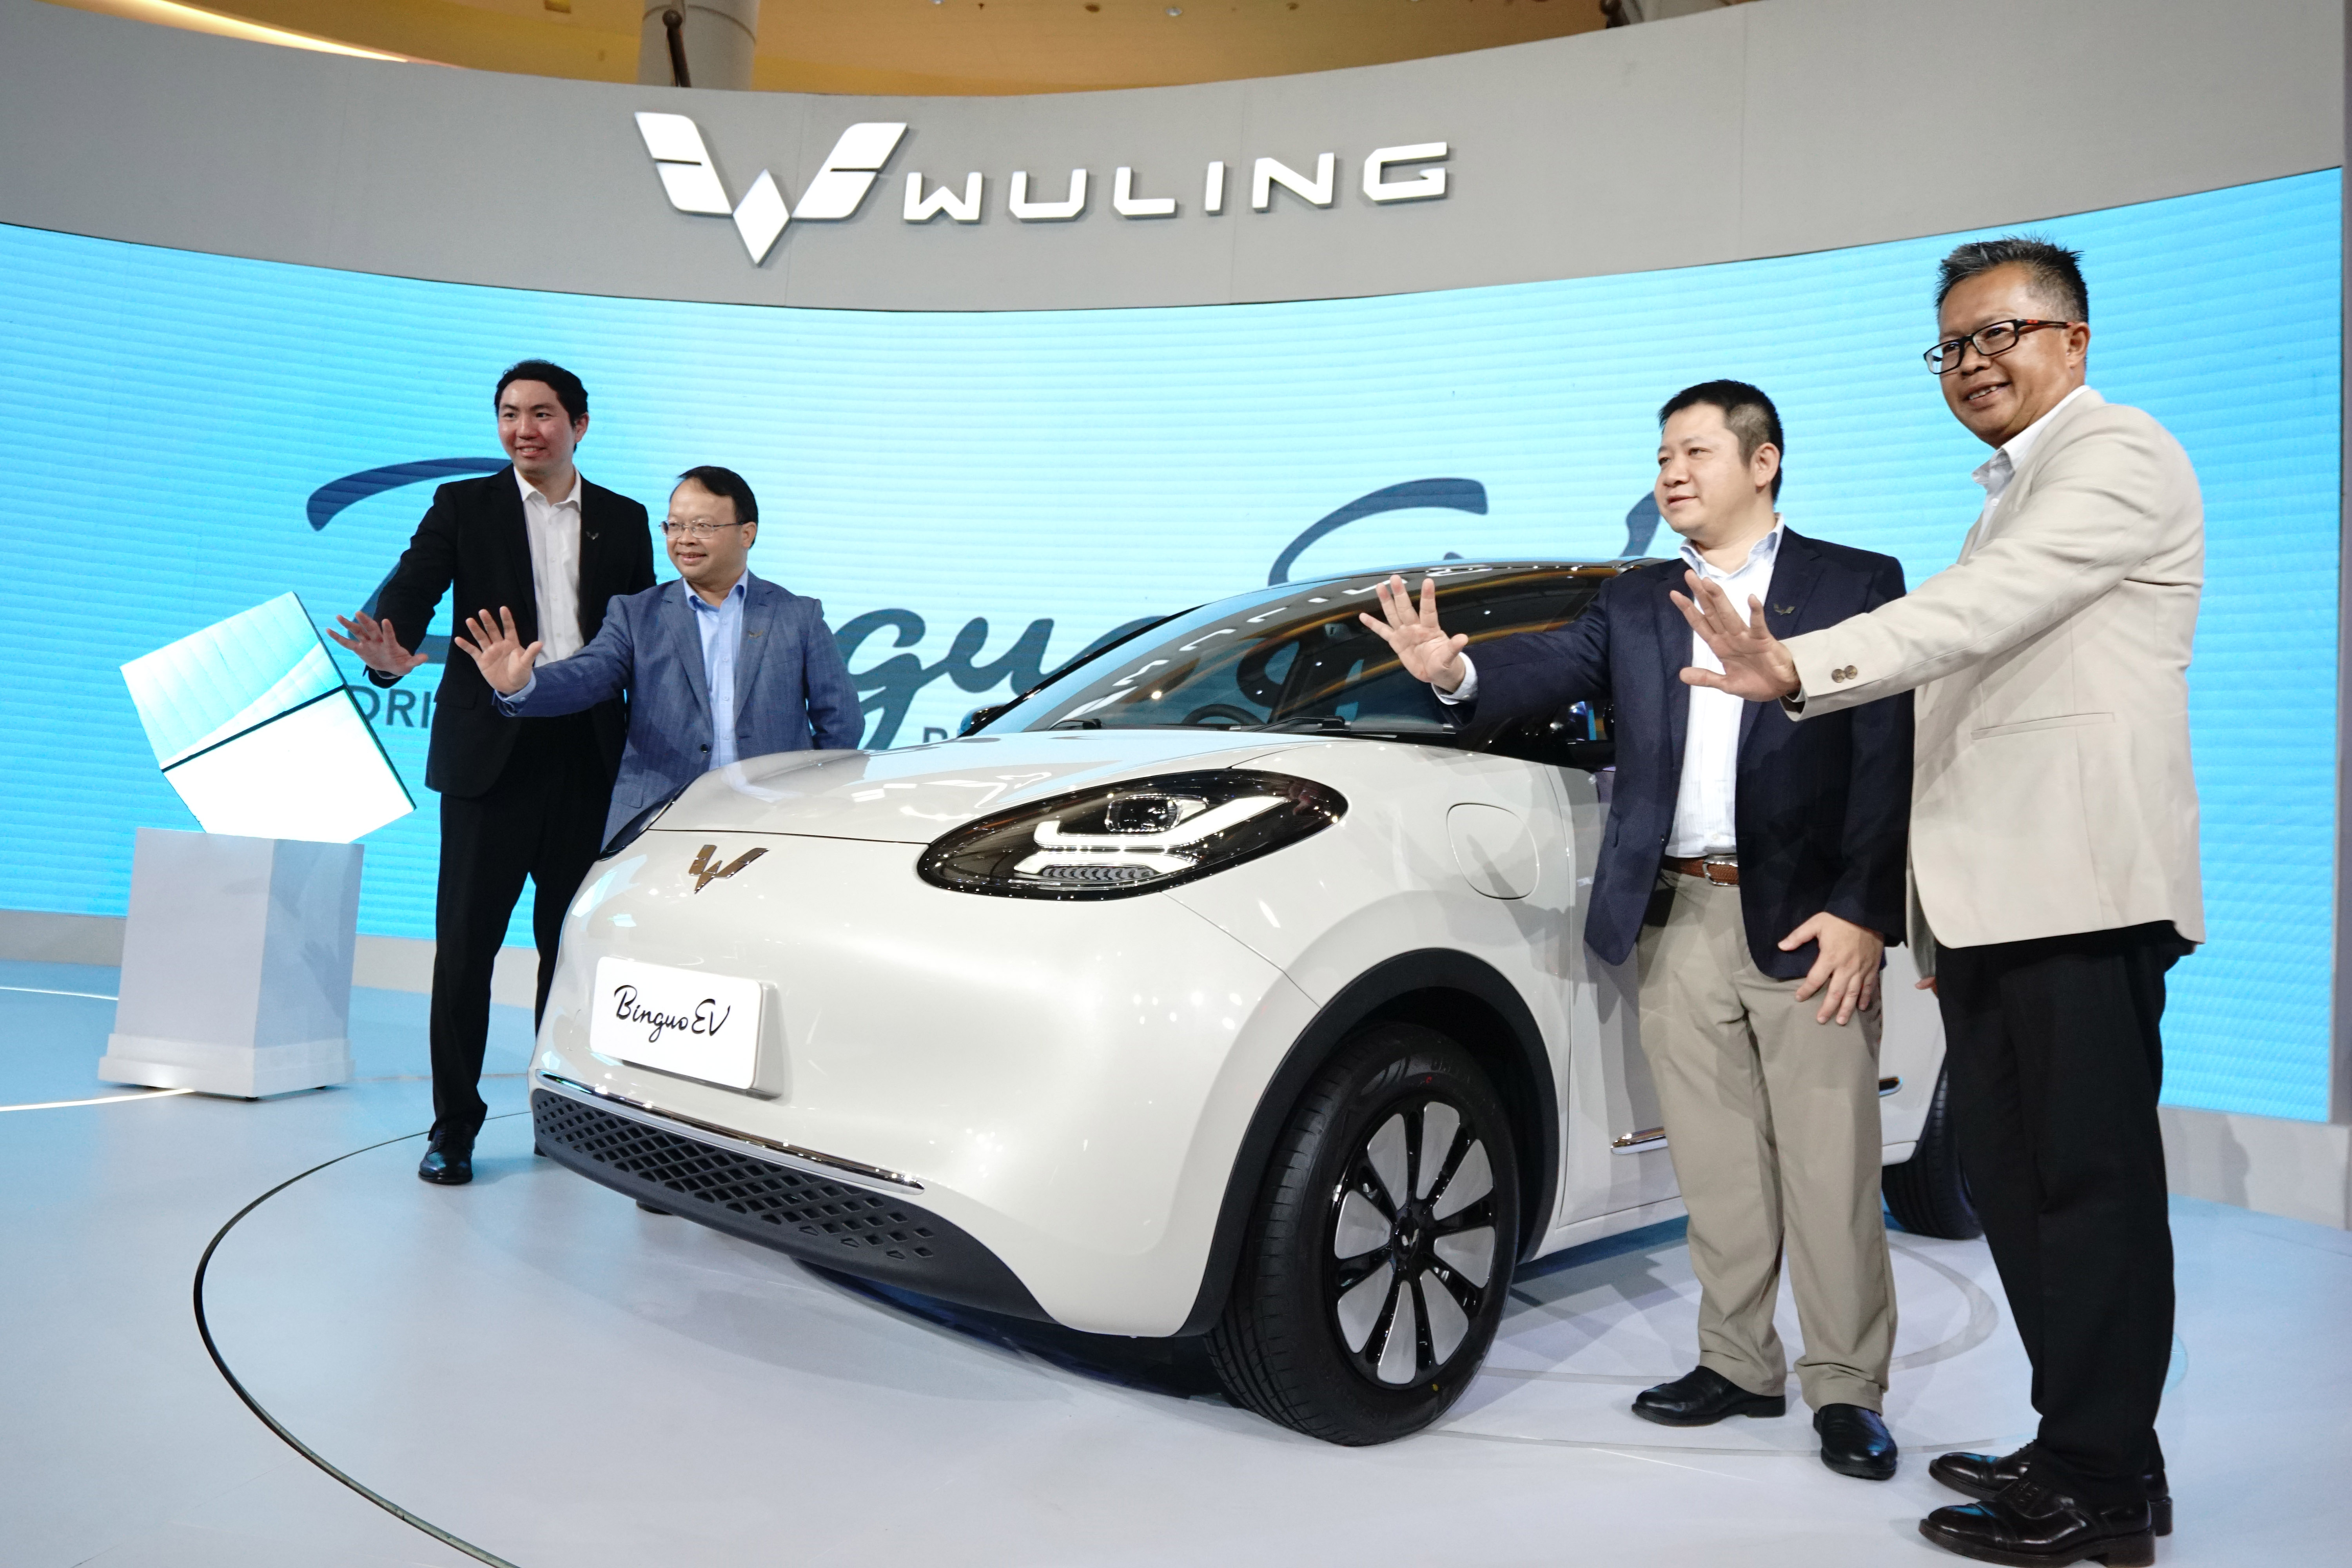 Image Wuling Officially Unveils the Exterior and Interior of the BinguoEV to the Public